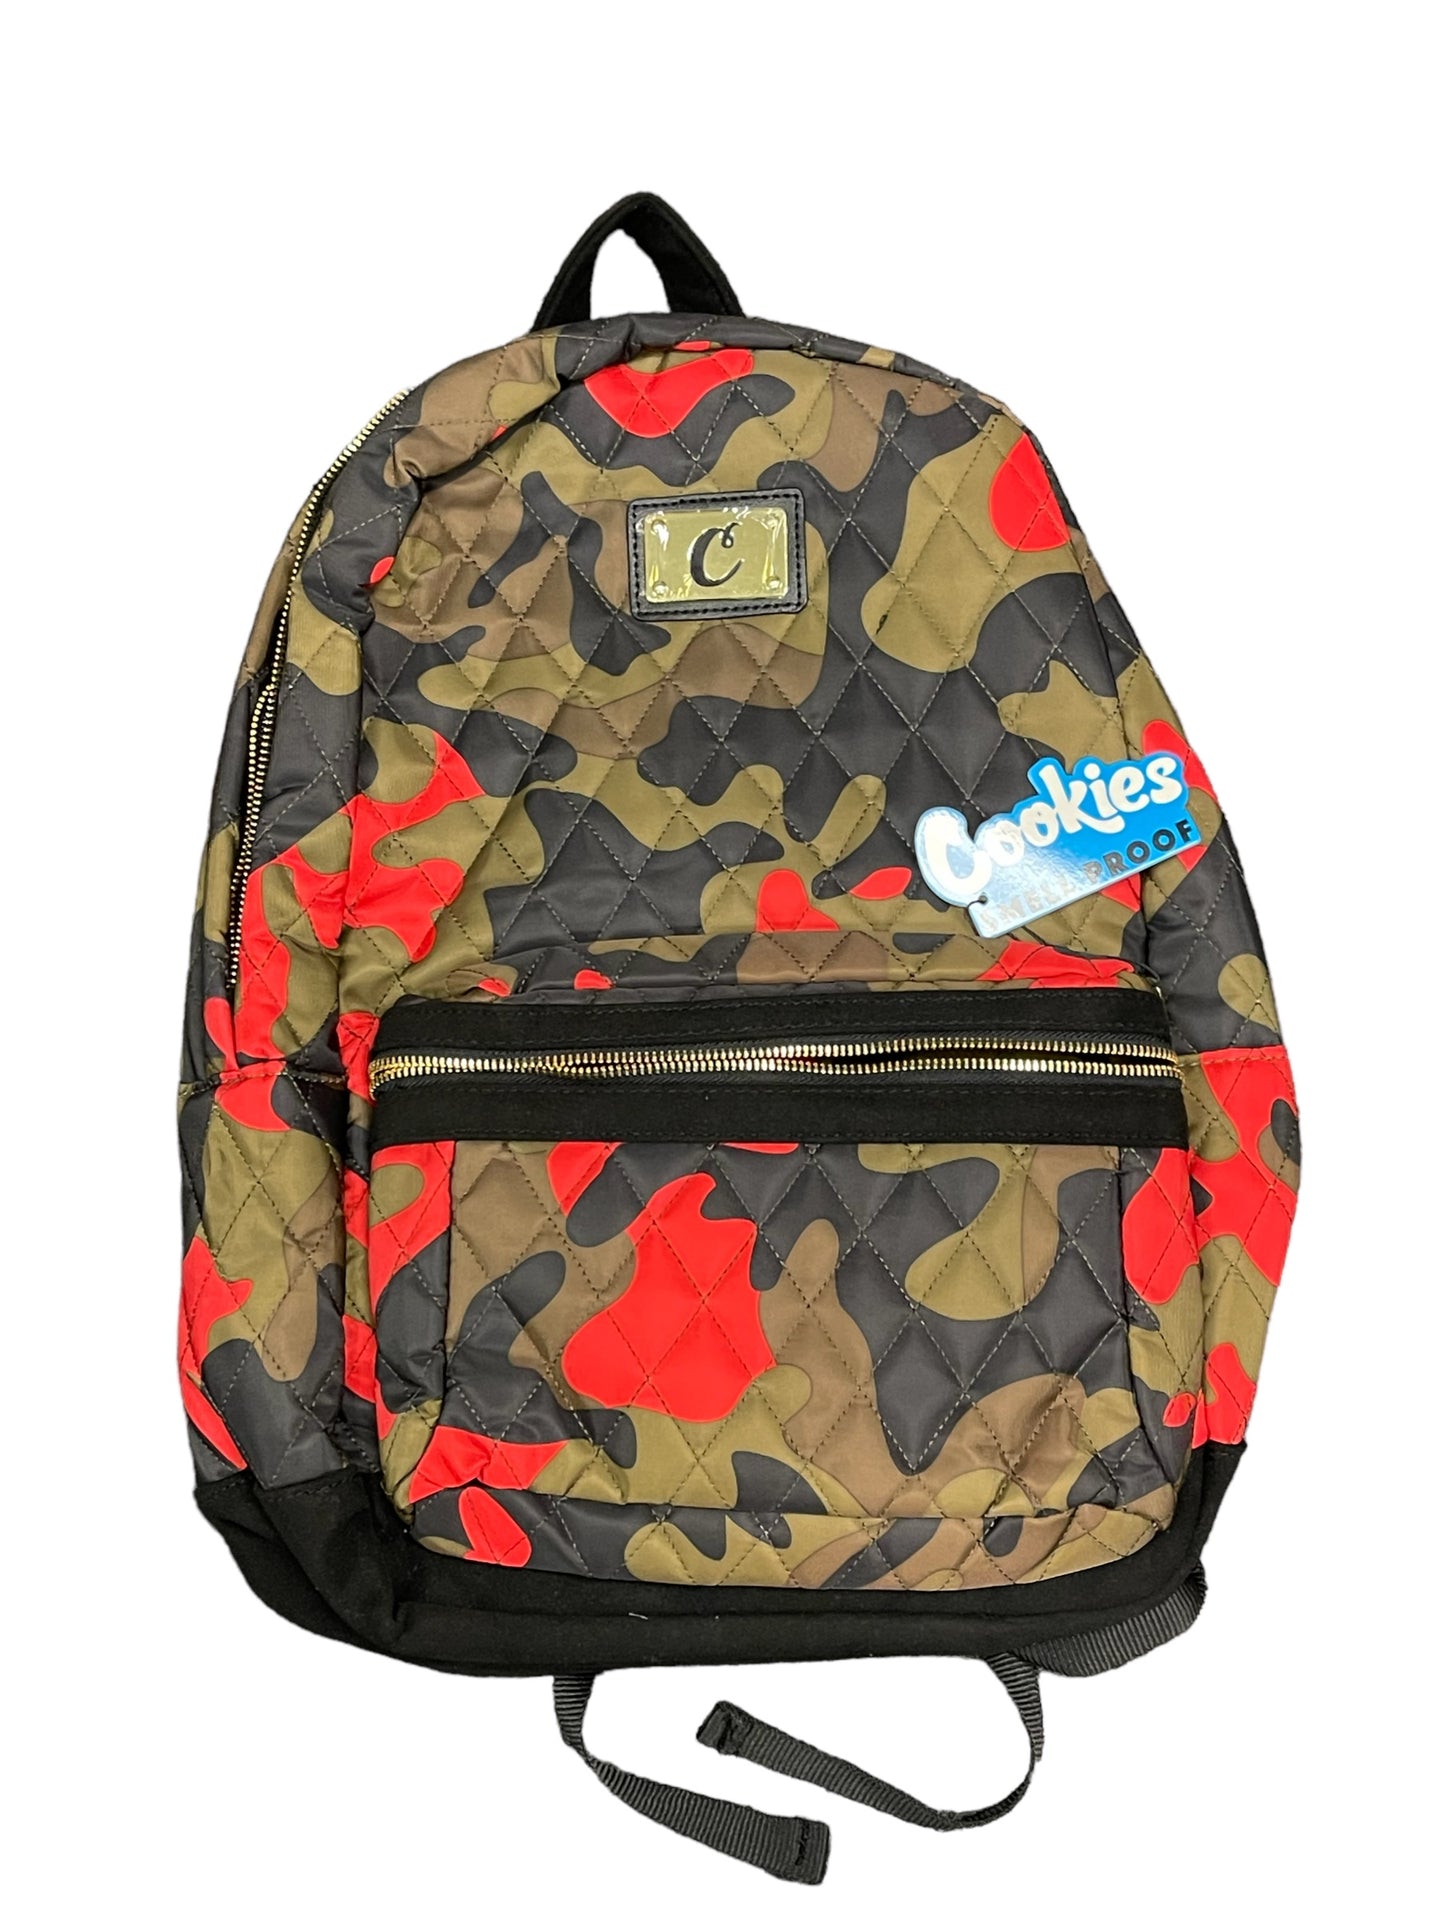 Cookies Red Camo Backpack